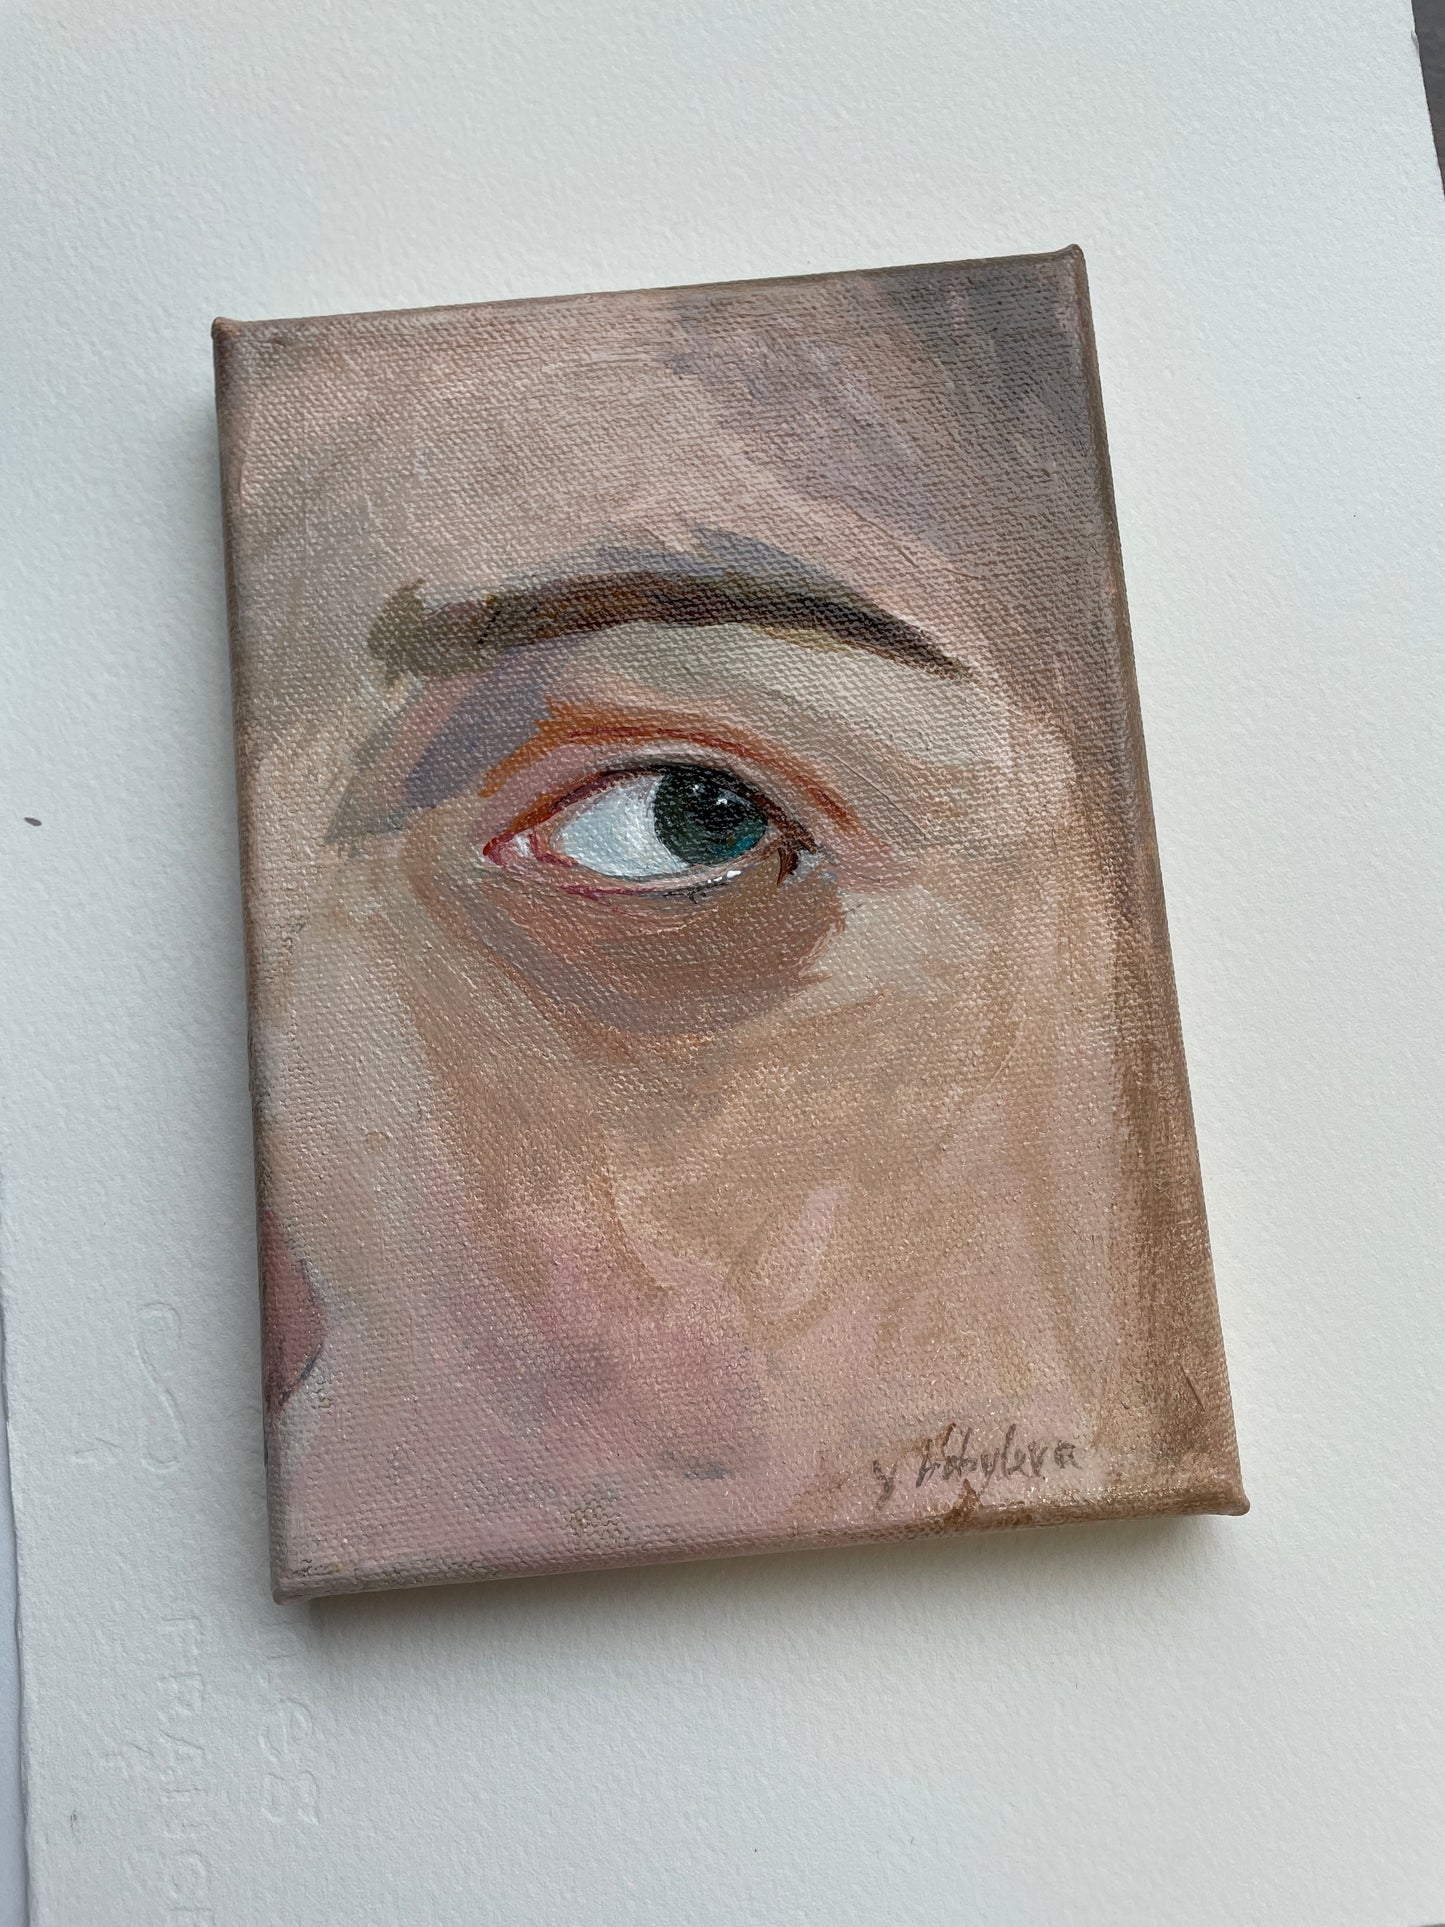 X SOLD An eye. Petite work in acrylics on stretched canvas.